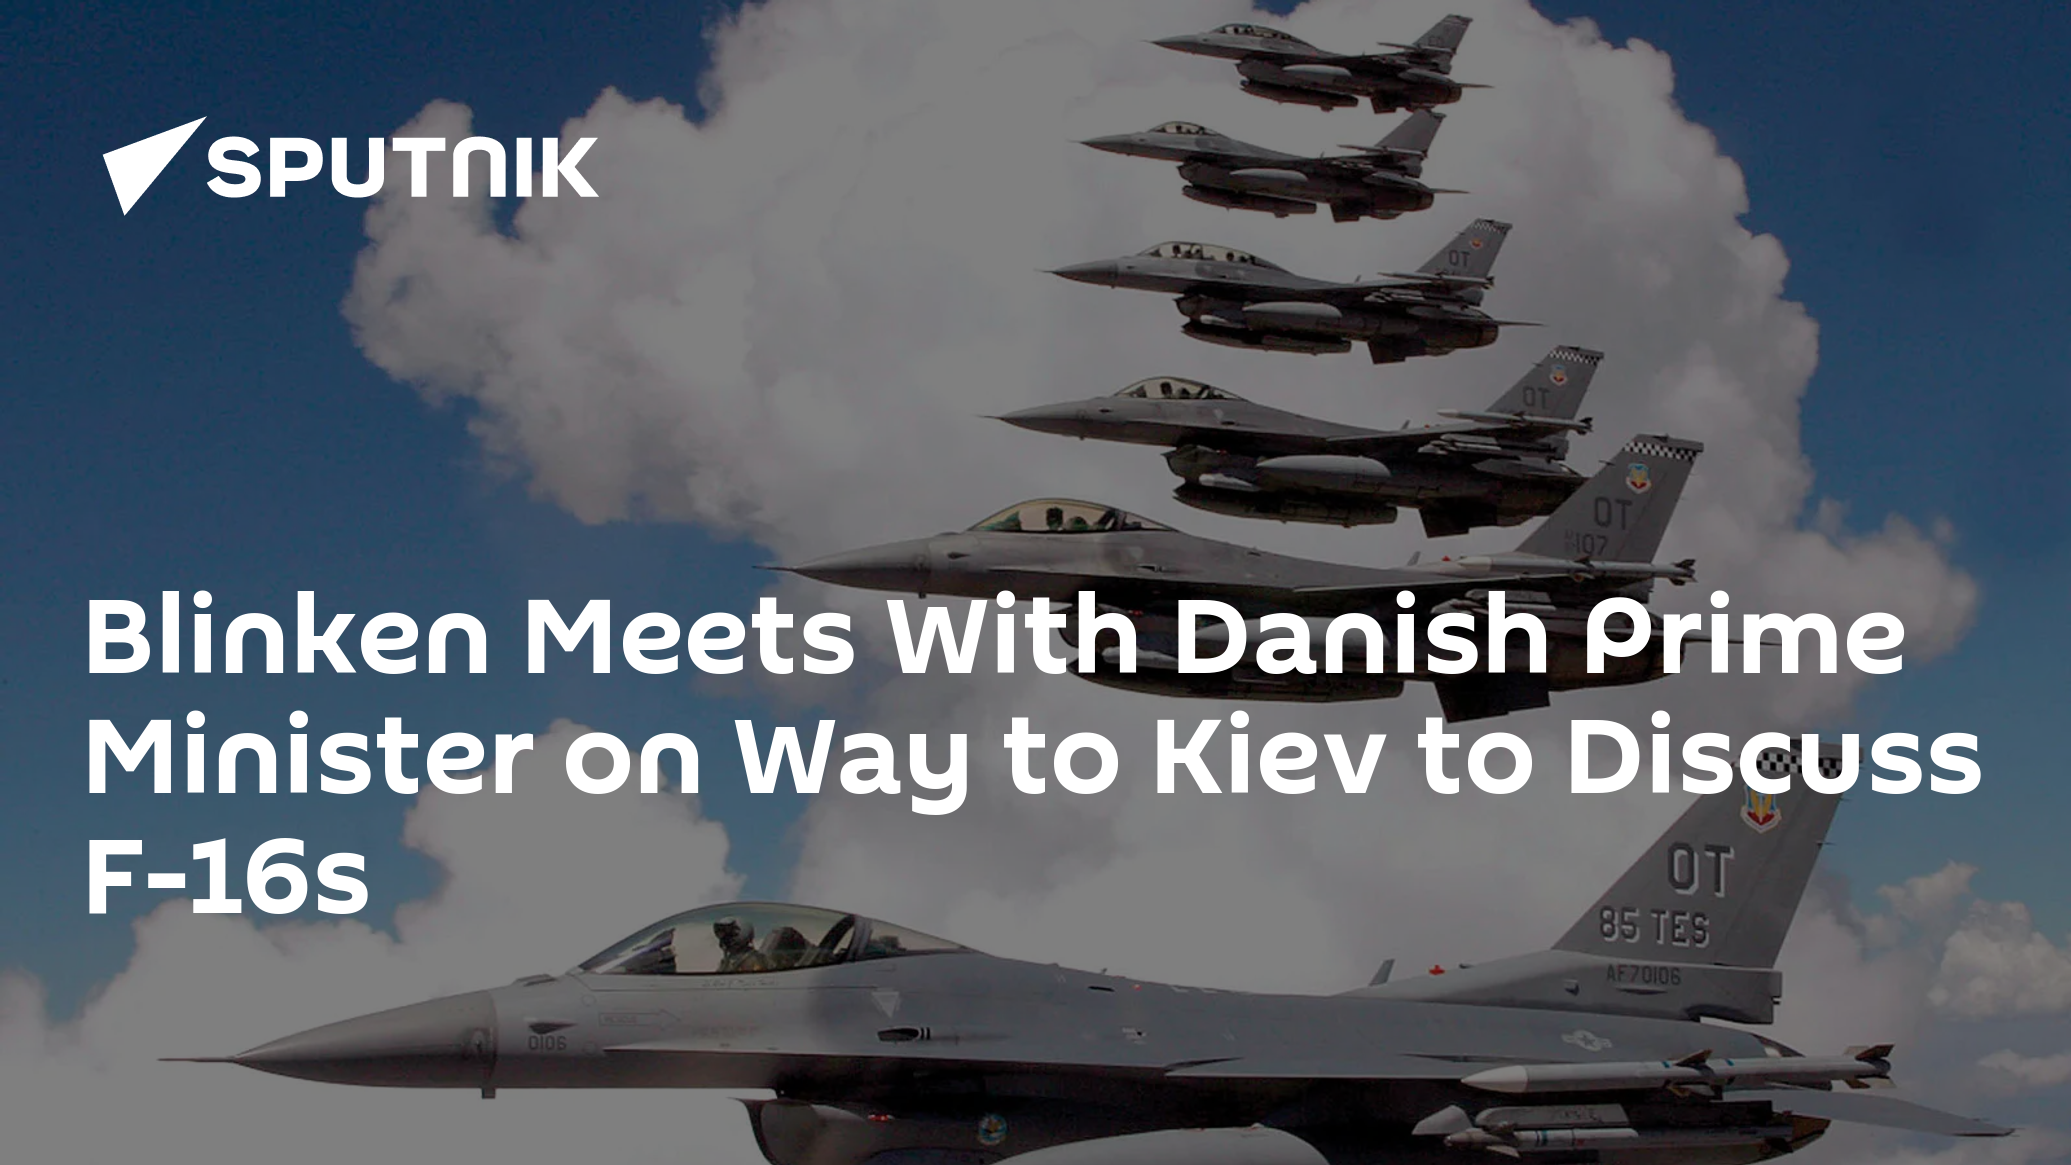 Blinken Meets With Danish Prime Minister on Way to Kiev to Discuss F-16s